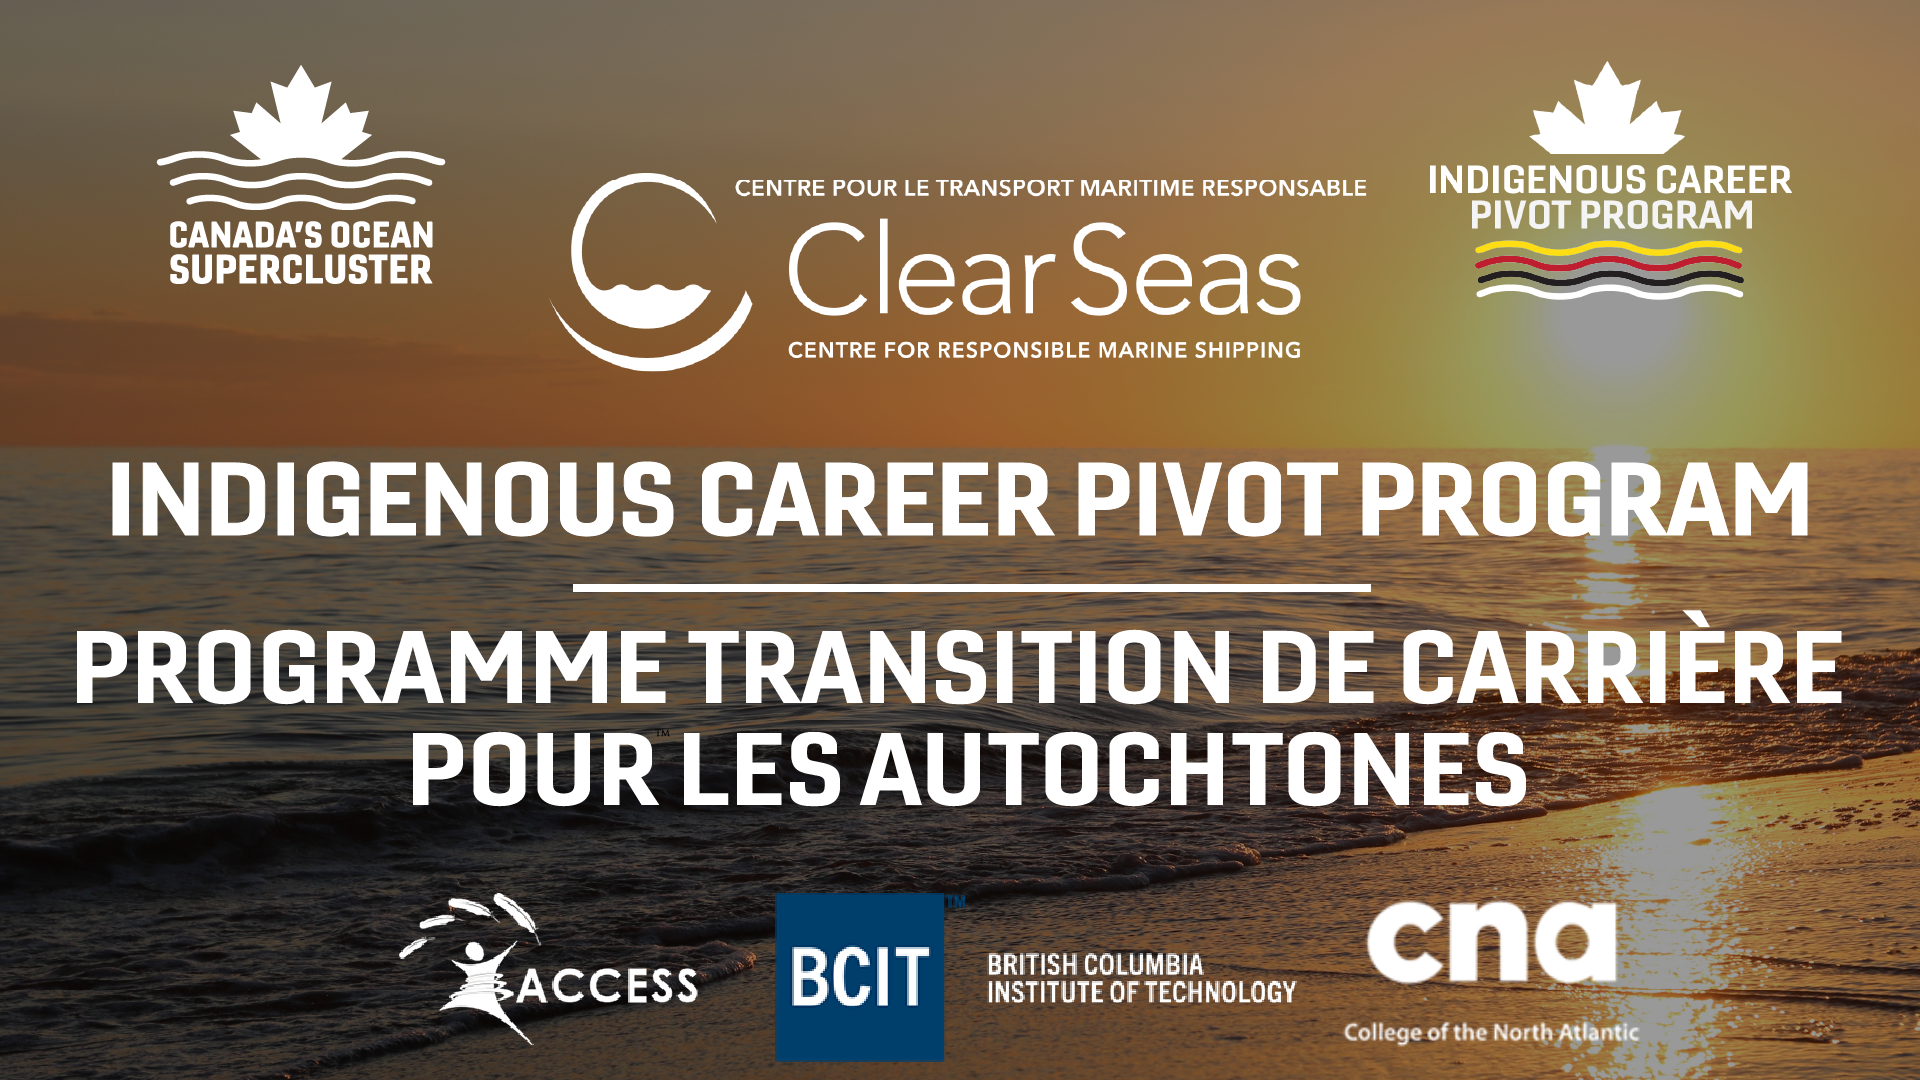 Alongside members of its Indigenous Working Group and Indigenous community partners, Canada’s Ocean Supercluster announced the Indigenous Career Pivot Project. This is a first-of-its-kind ocean innovation ecosystem project in Canada.